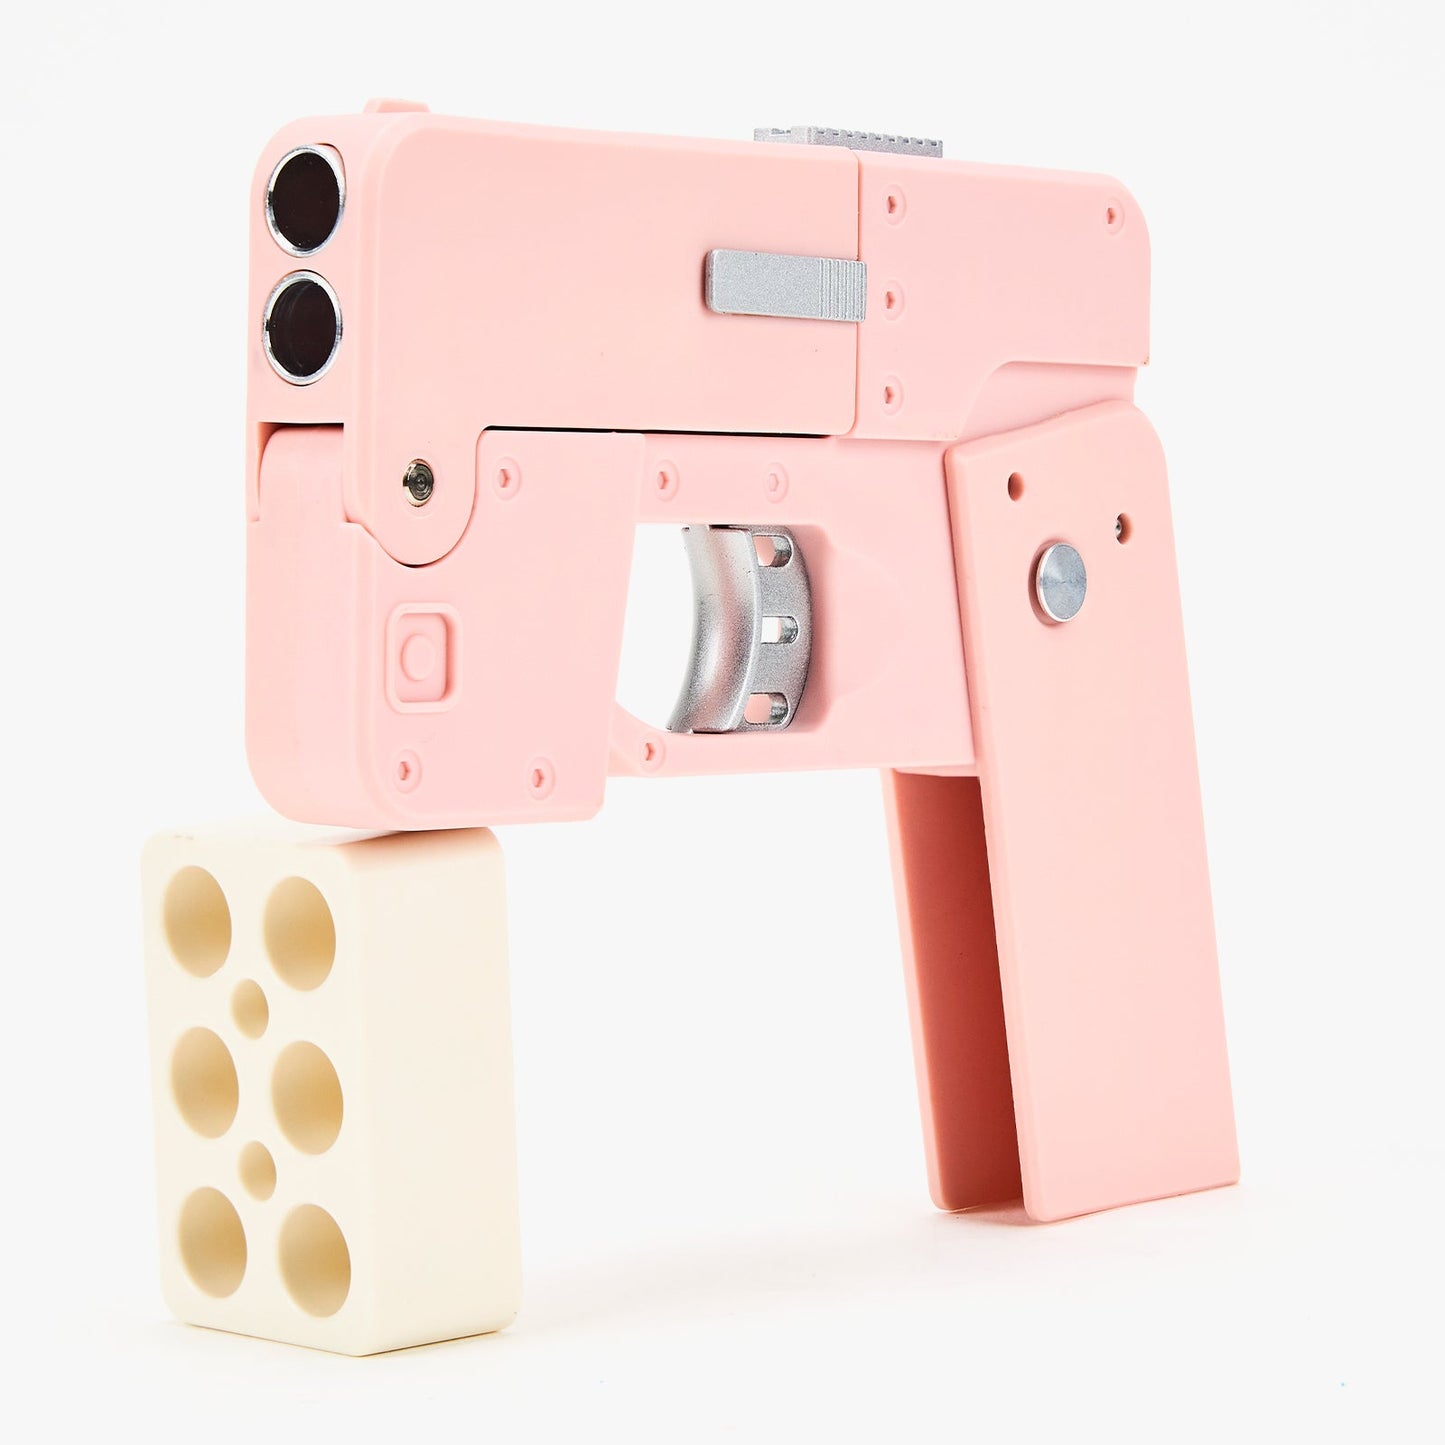 IC380 Cellphone Pistol Toy Safe toys for 18+